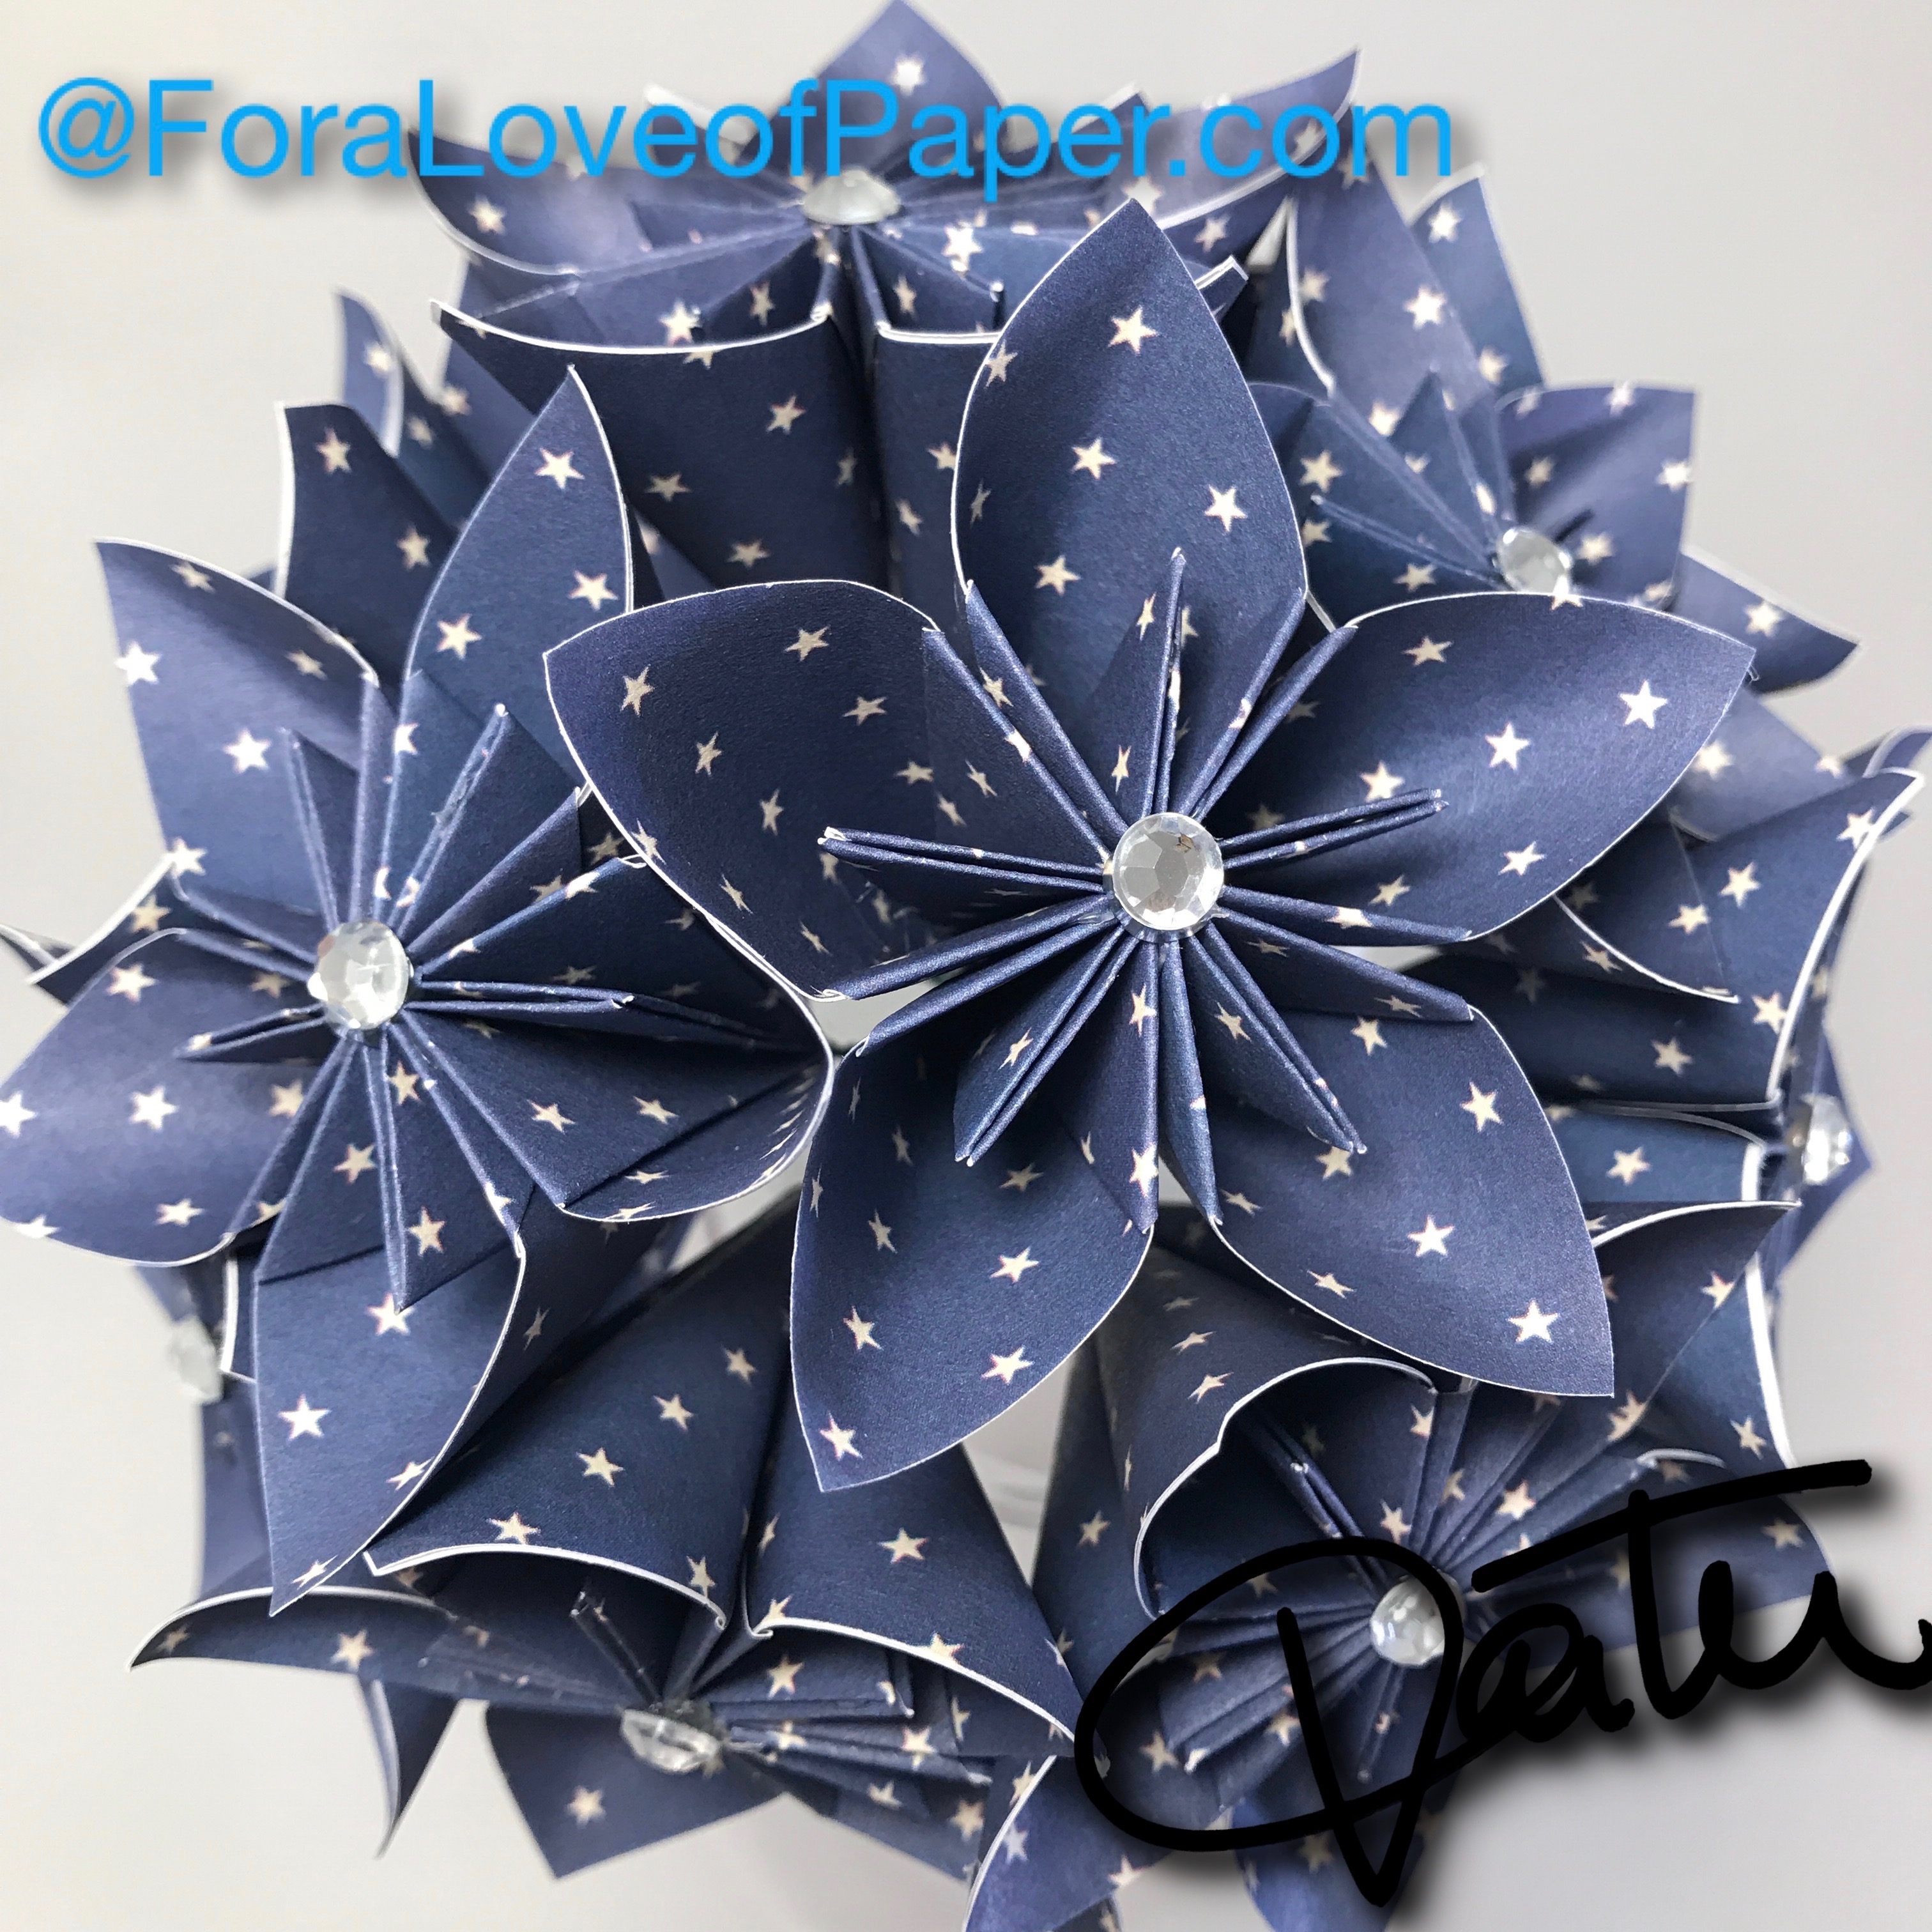 Paper flowers in tiny stars themed scrapbook paper